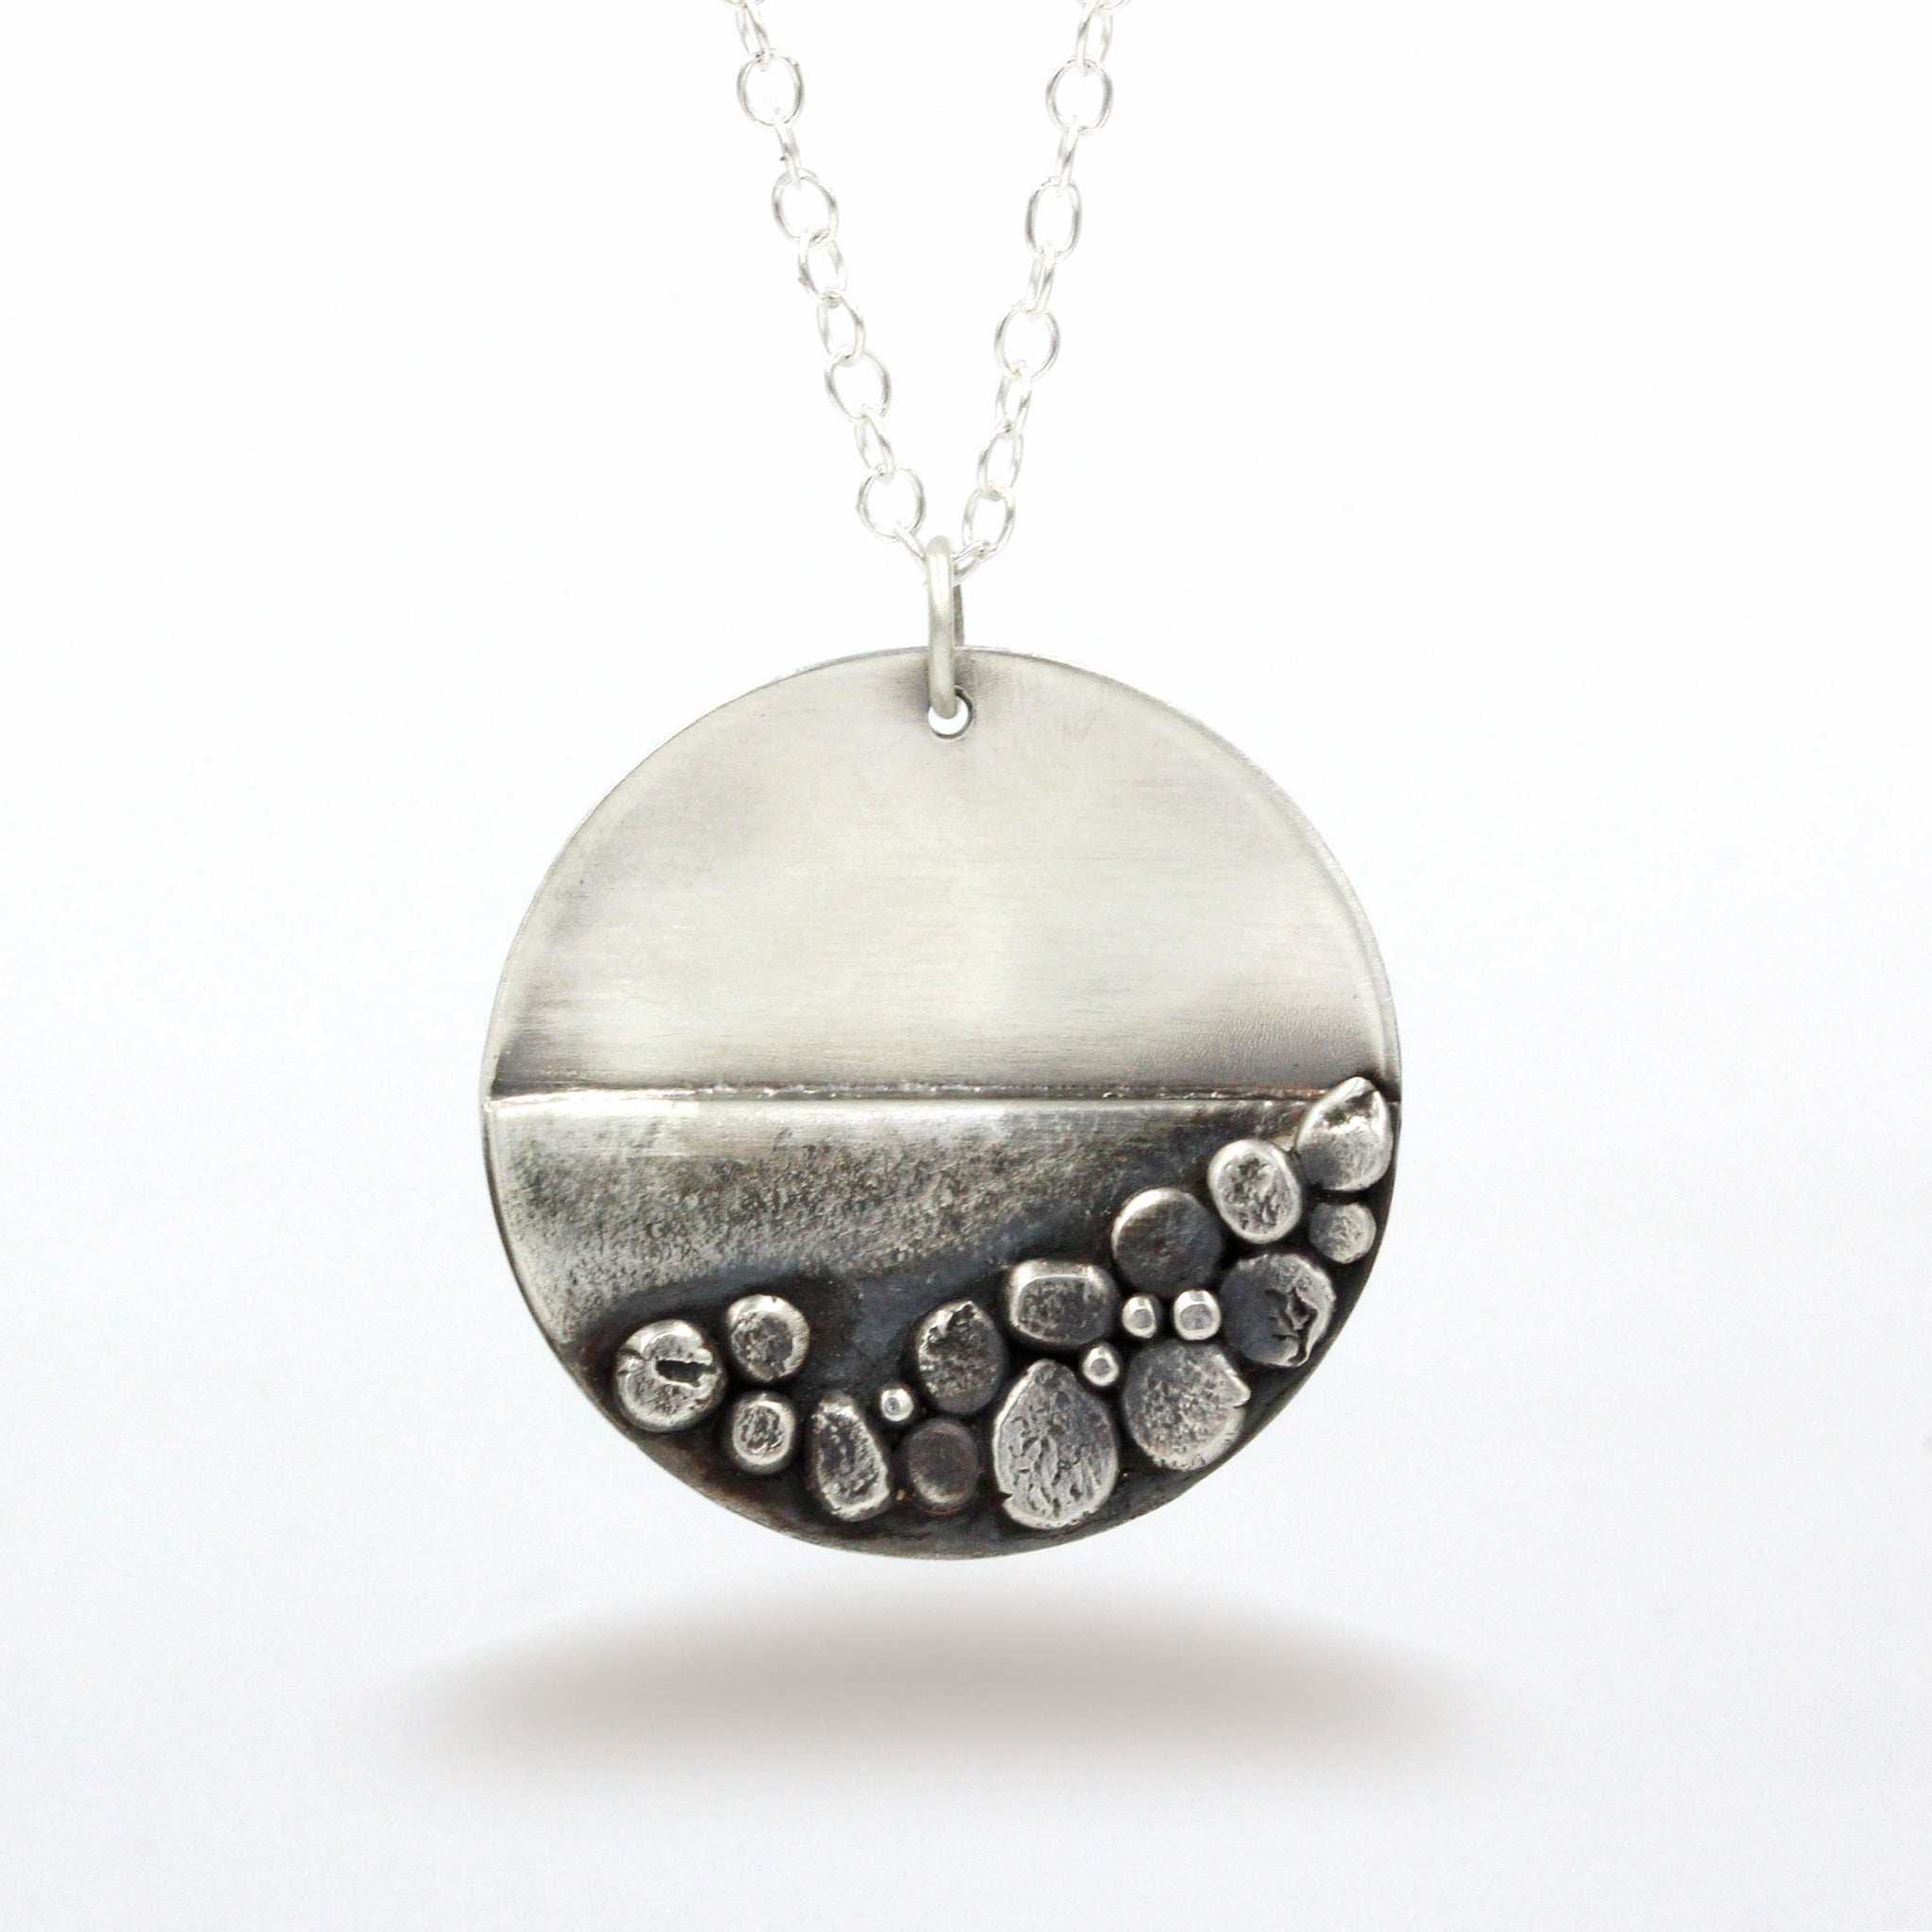 Sterling silver necklace, showing a moonlit beach. Handmade recycled silver necklace.